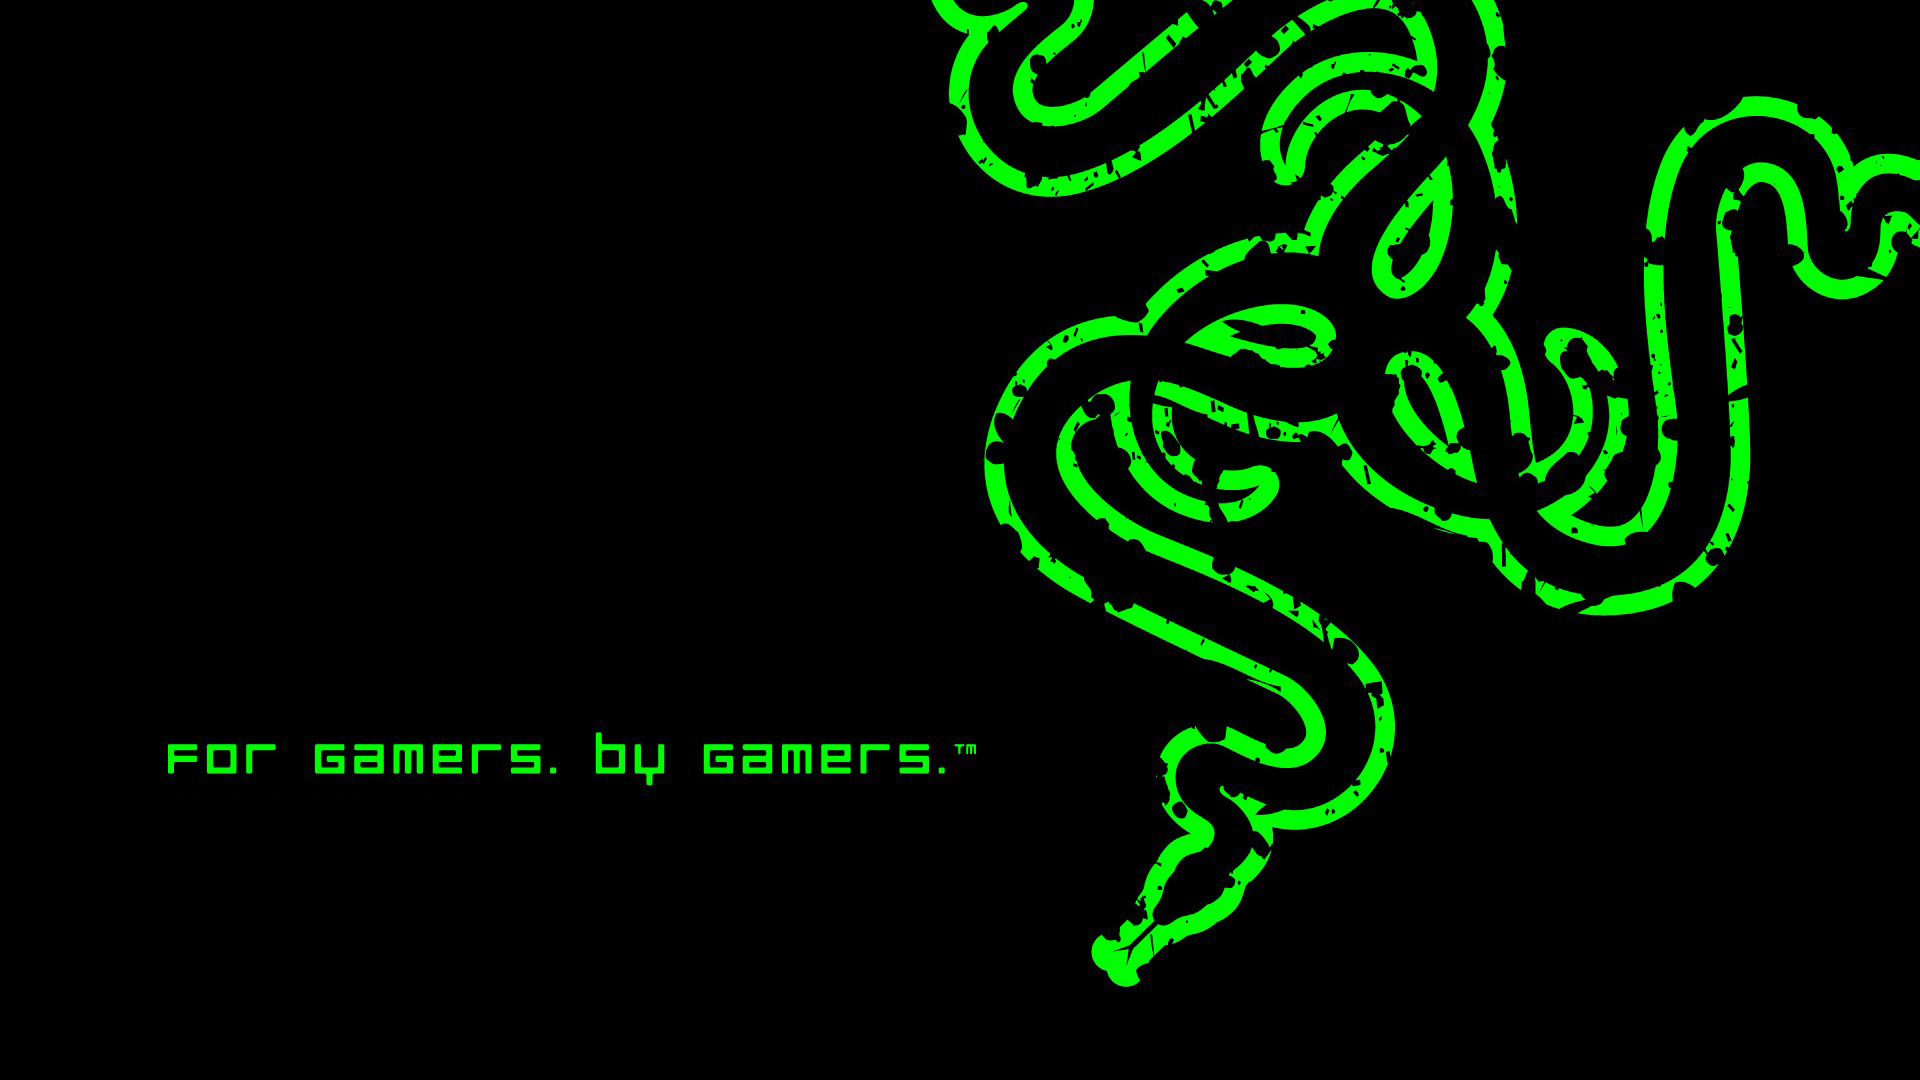 razer-logo-for-gamers-by-gamers-1920x1080